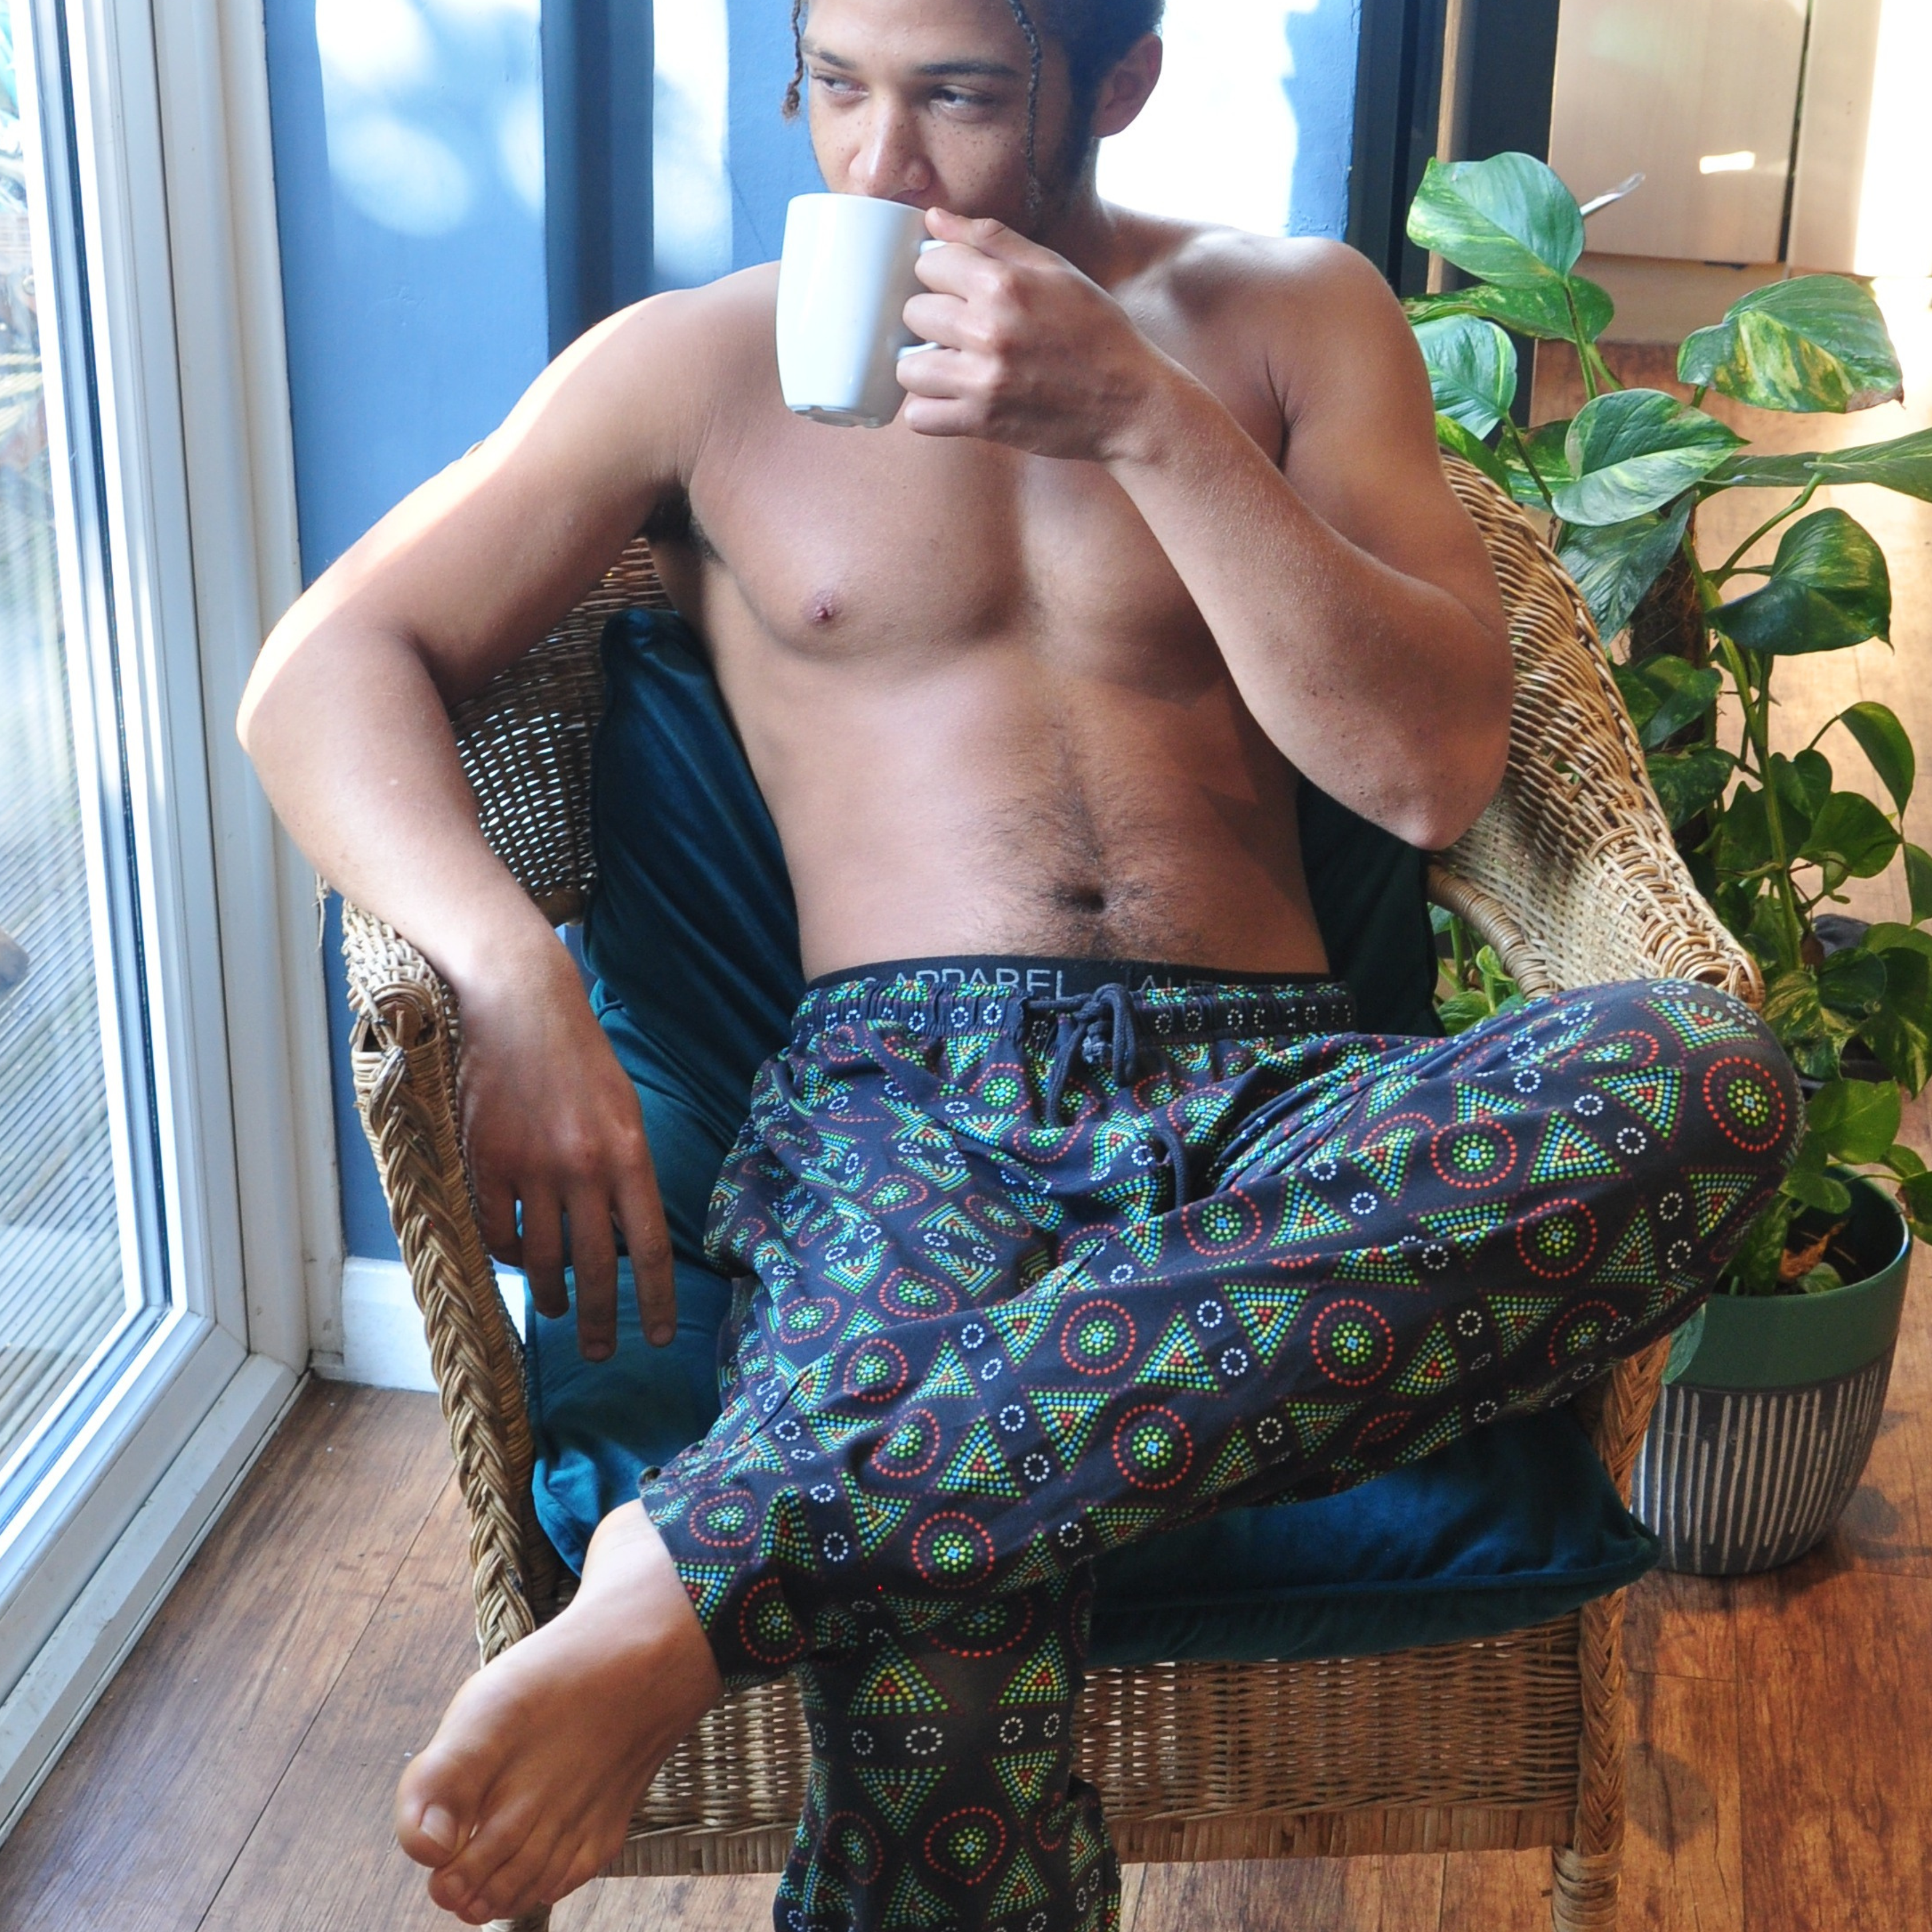 A shirtless person with short hair sits in a wicker chair, drinking from a white mug. They are wearing colorful patterned organic cotton pyjama bottoms and gazing to the side. The scene includes a large window, a leafy green plant, and wooden flooring, giving a cozy ambiance.